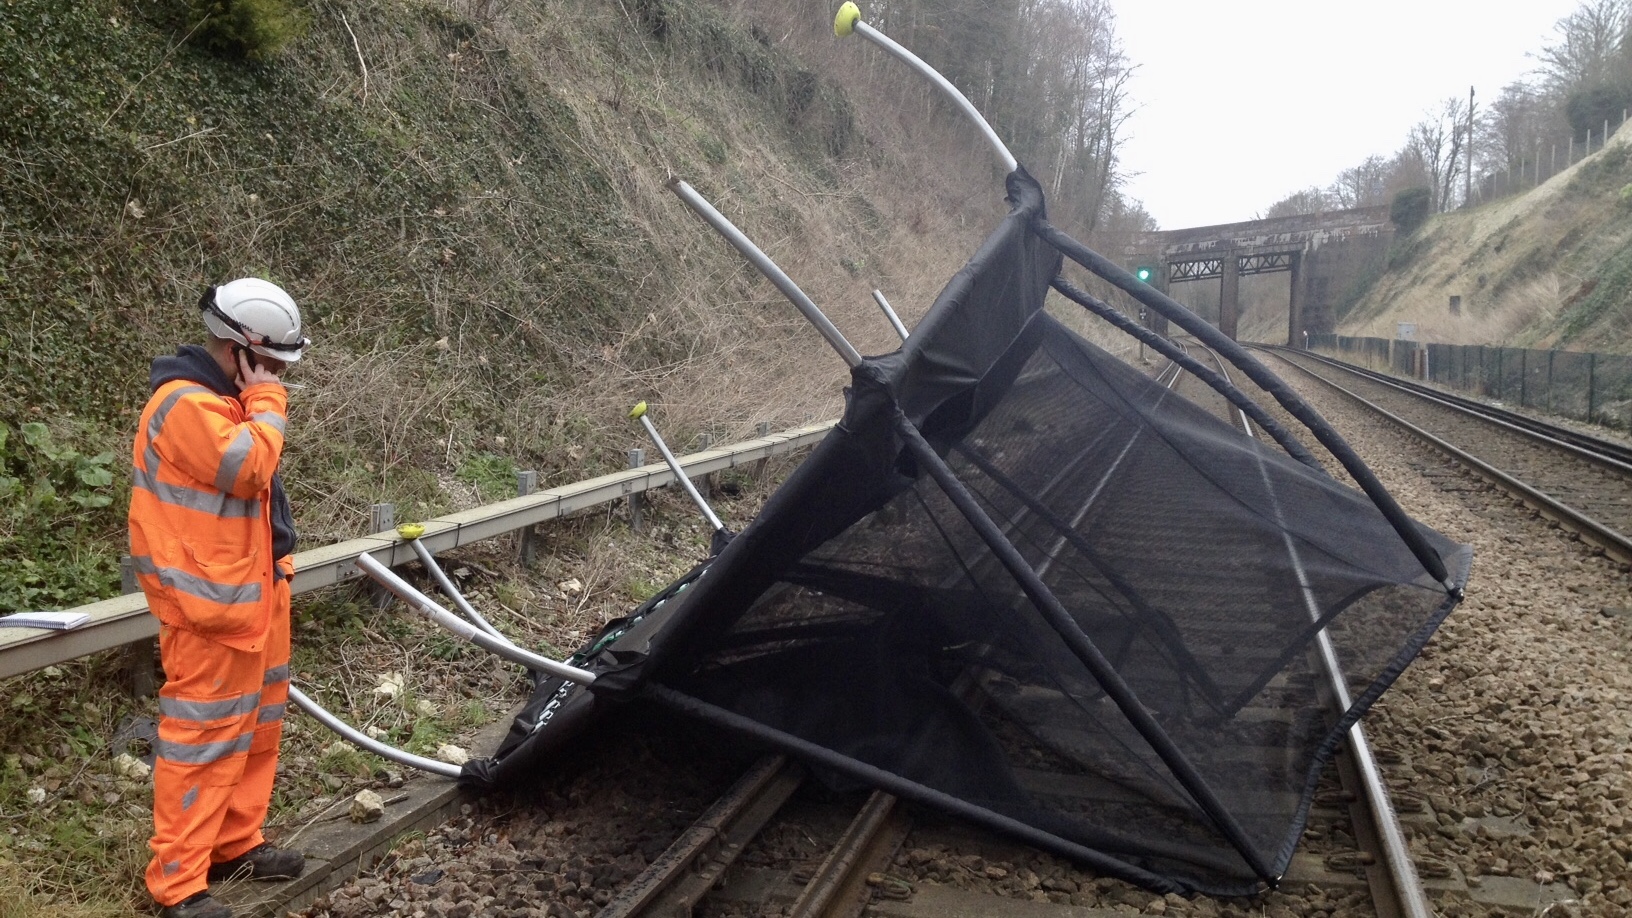 A trampoline blown onto a railway track be strong winds. Picture from Network Rail